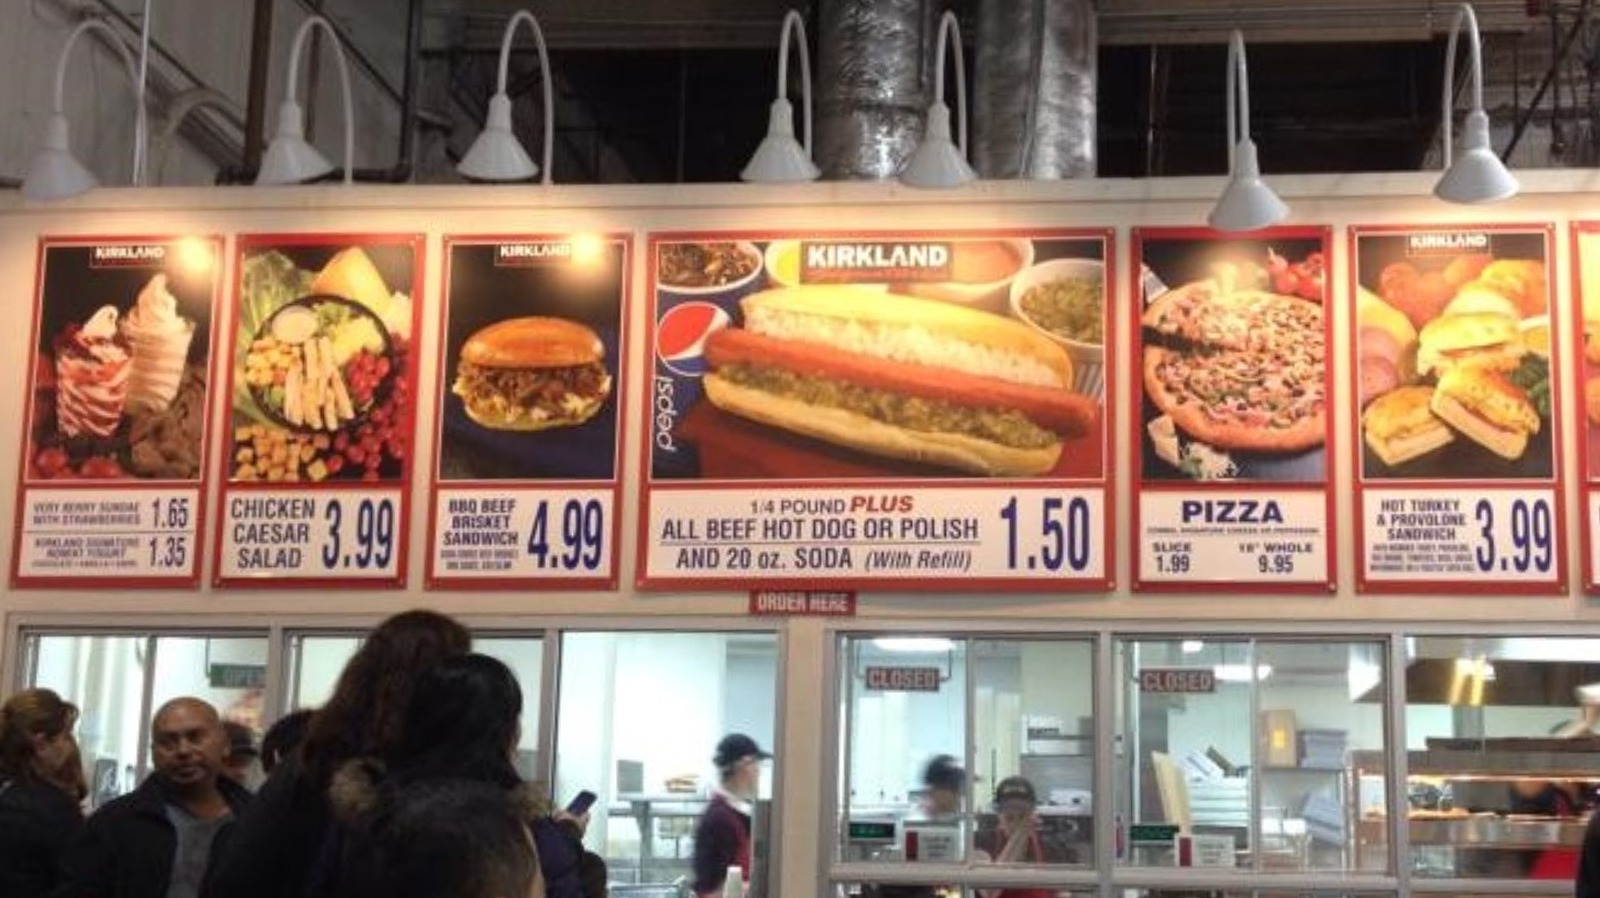 Costco vs. Sam's Club: Which Has the Better Food Court Items?